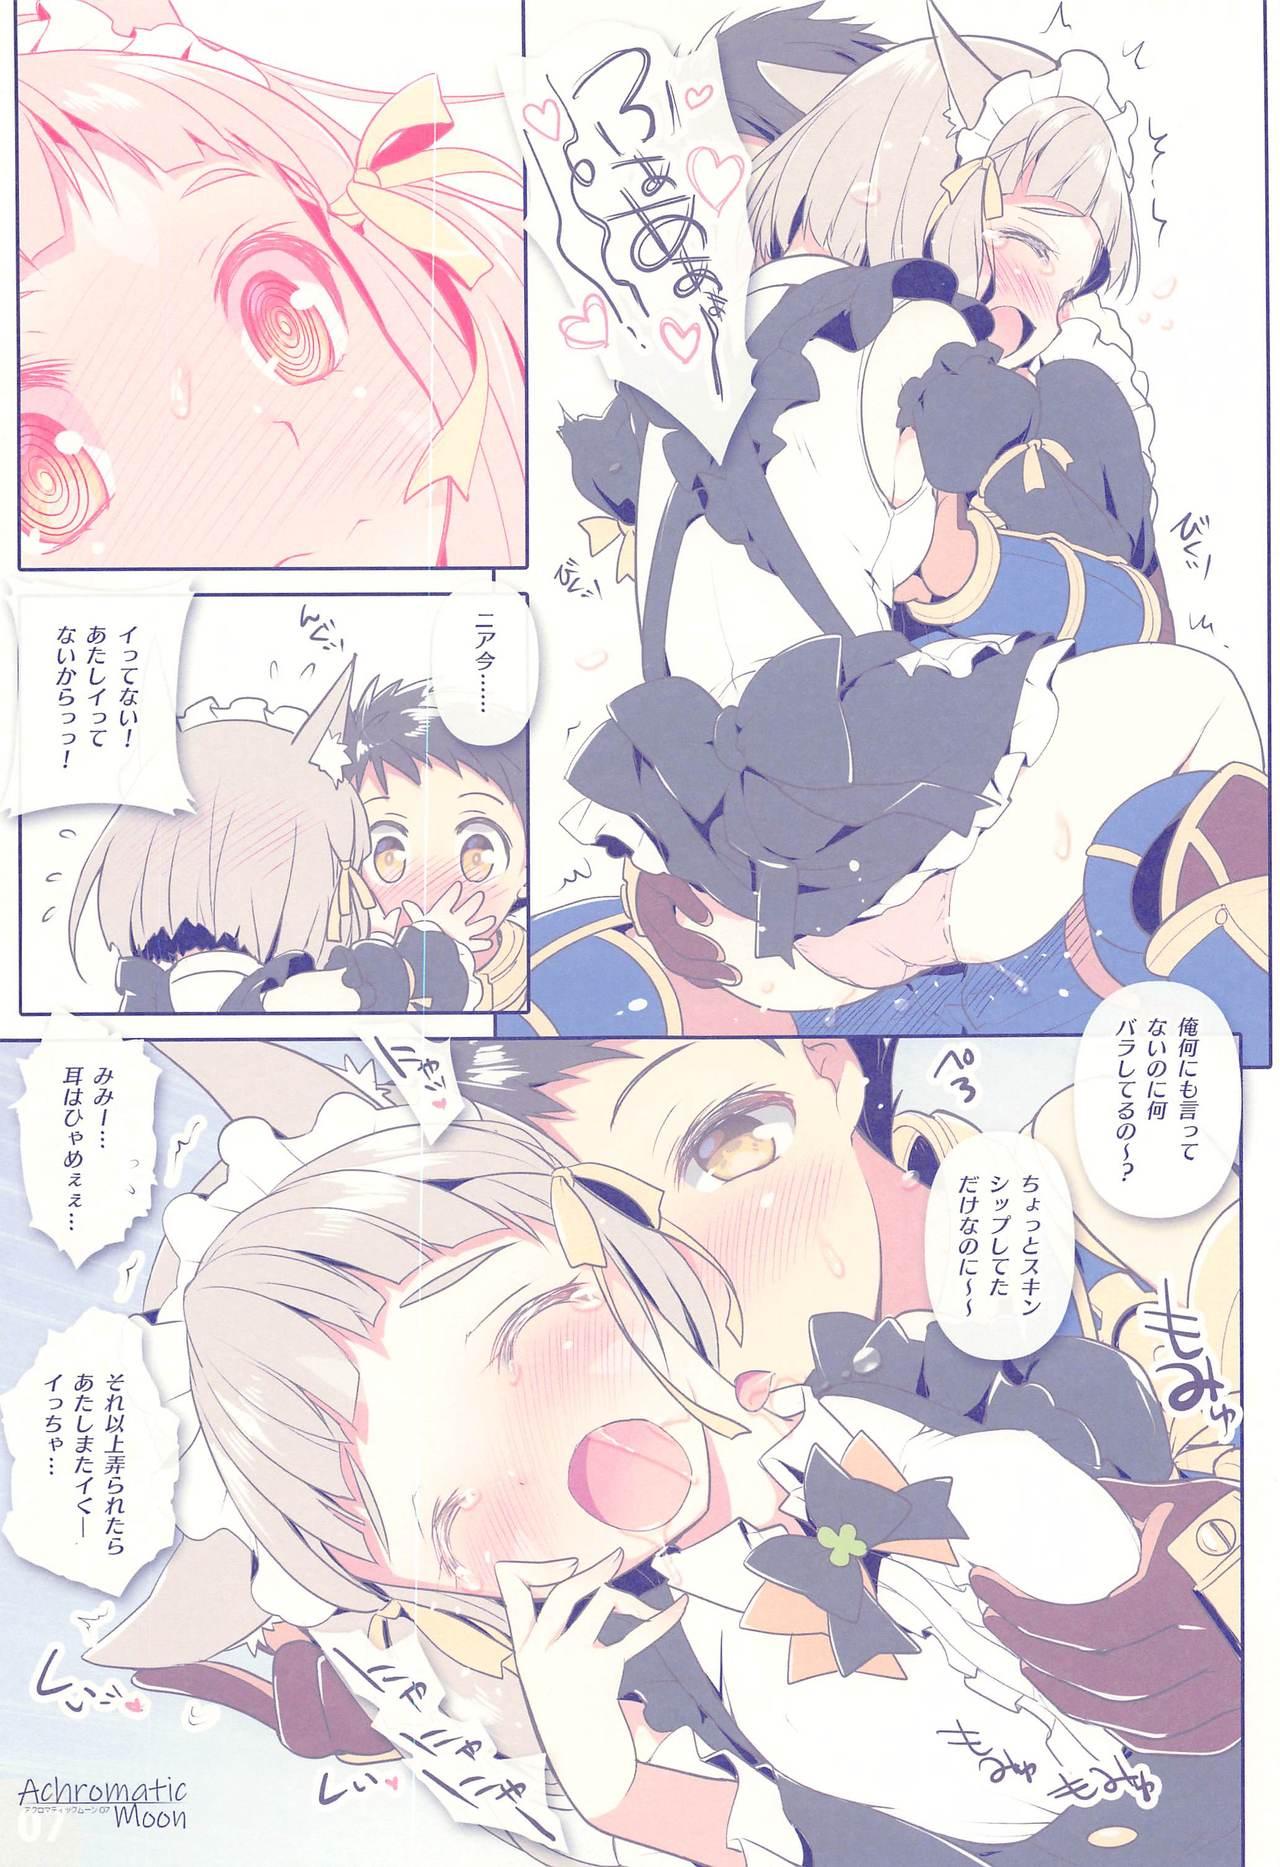 Pigtails Achromatic Moon 07 - Xenoblade chronicles 2 Leather - Page 6